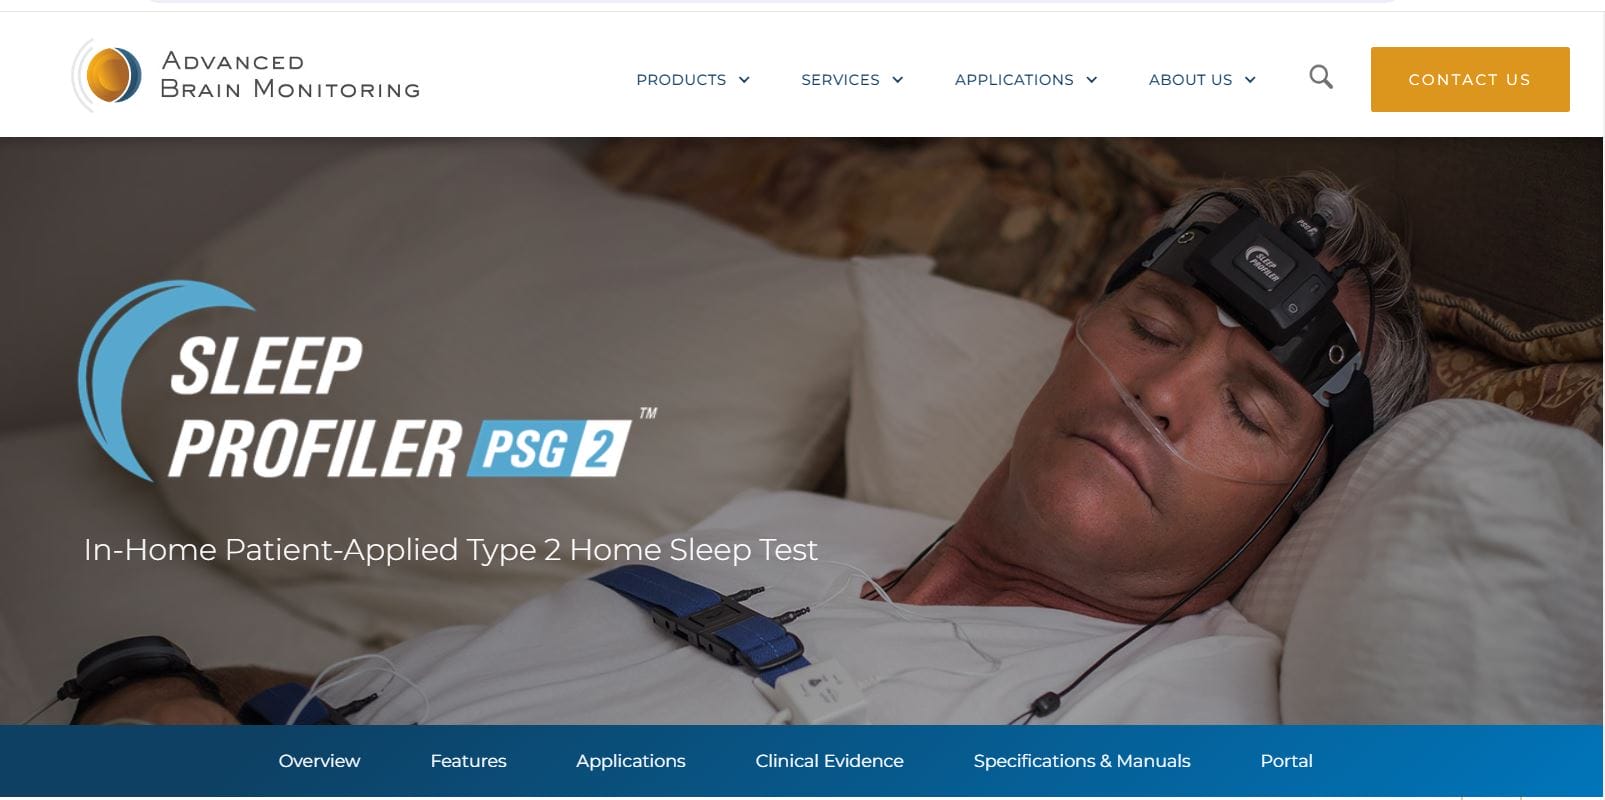 Man lying on a bed wearing sleep monitoring headgear, with text about Sleep Profiler PSG2 Home Test and pricing guide on Advanced Brain Monitoring website banner.